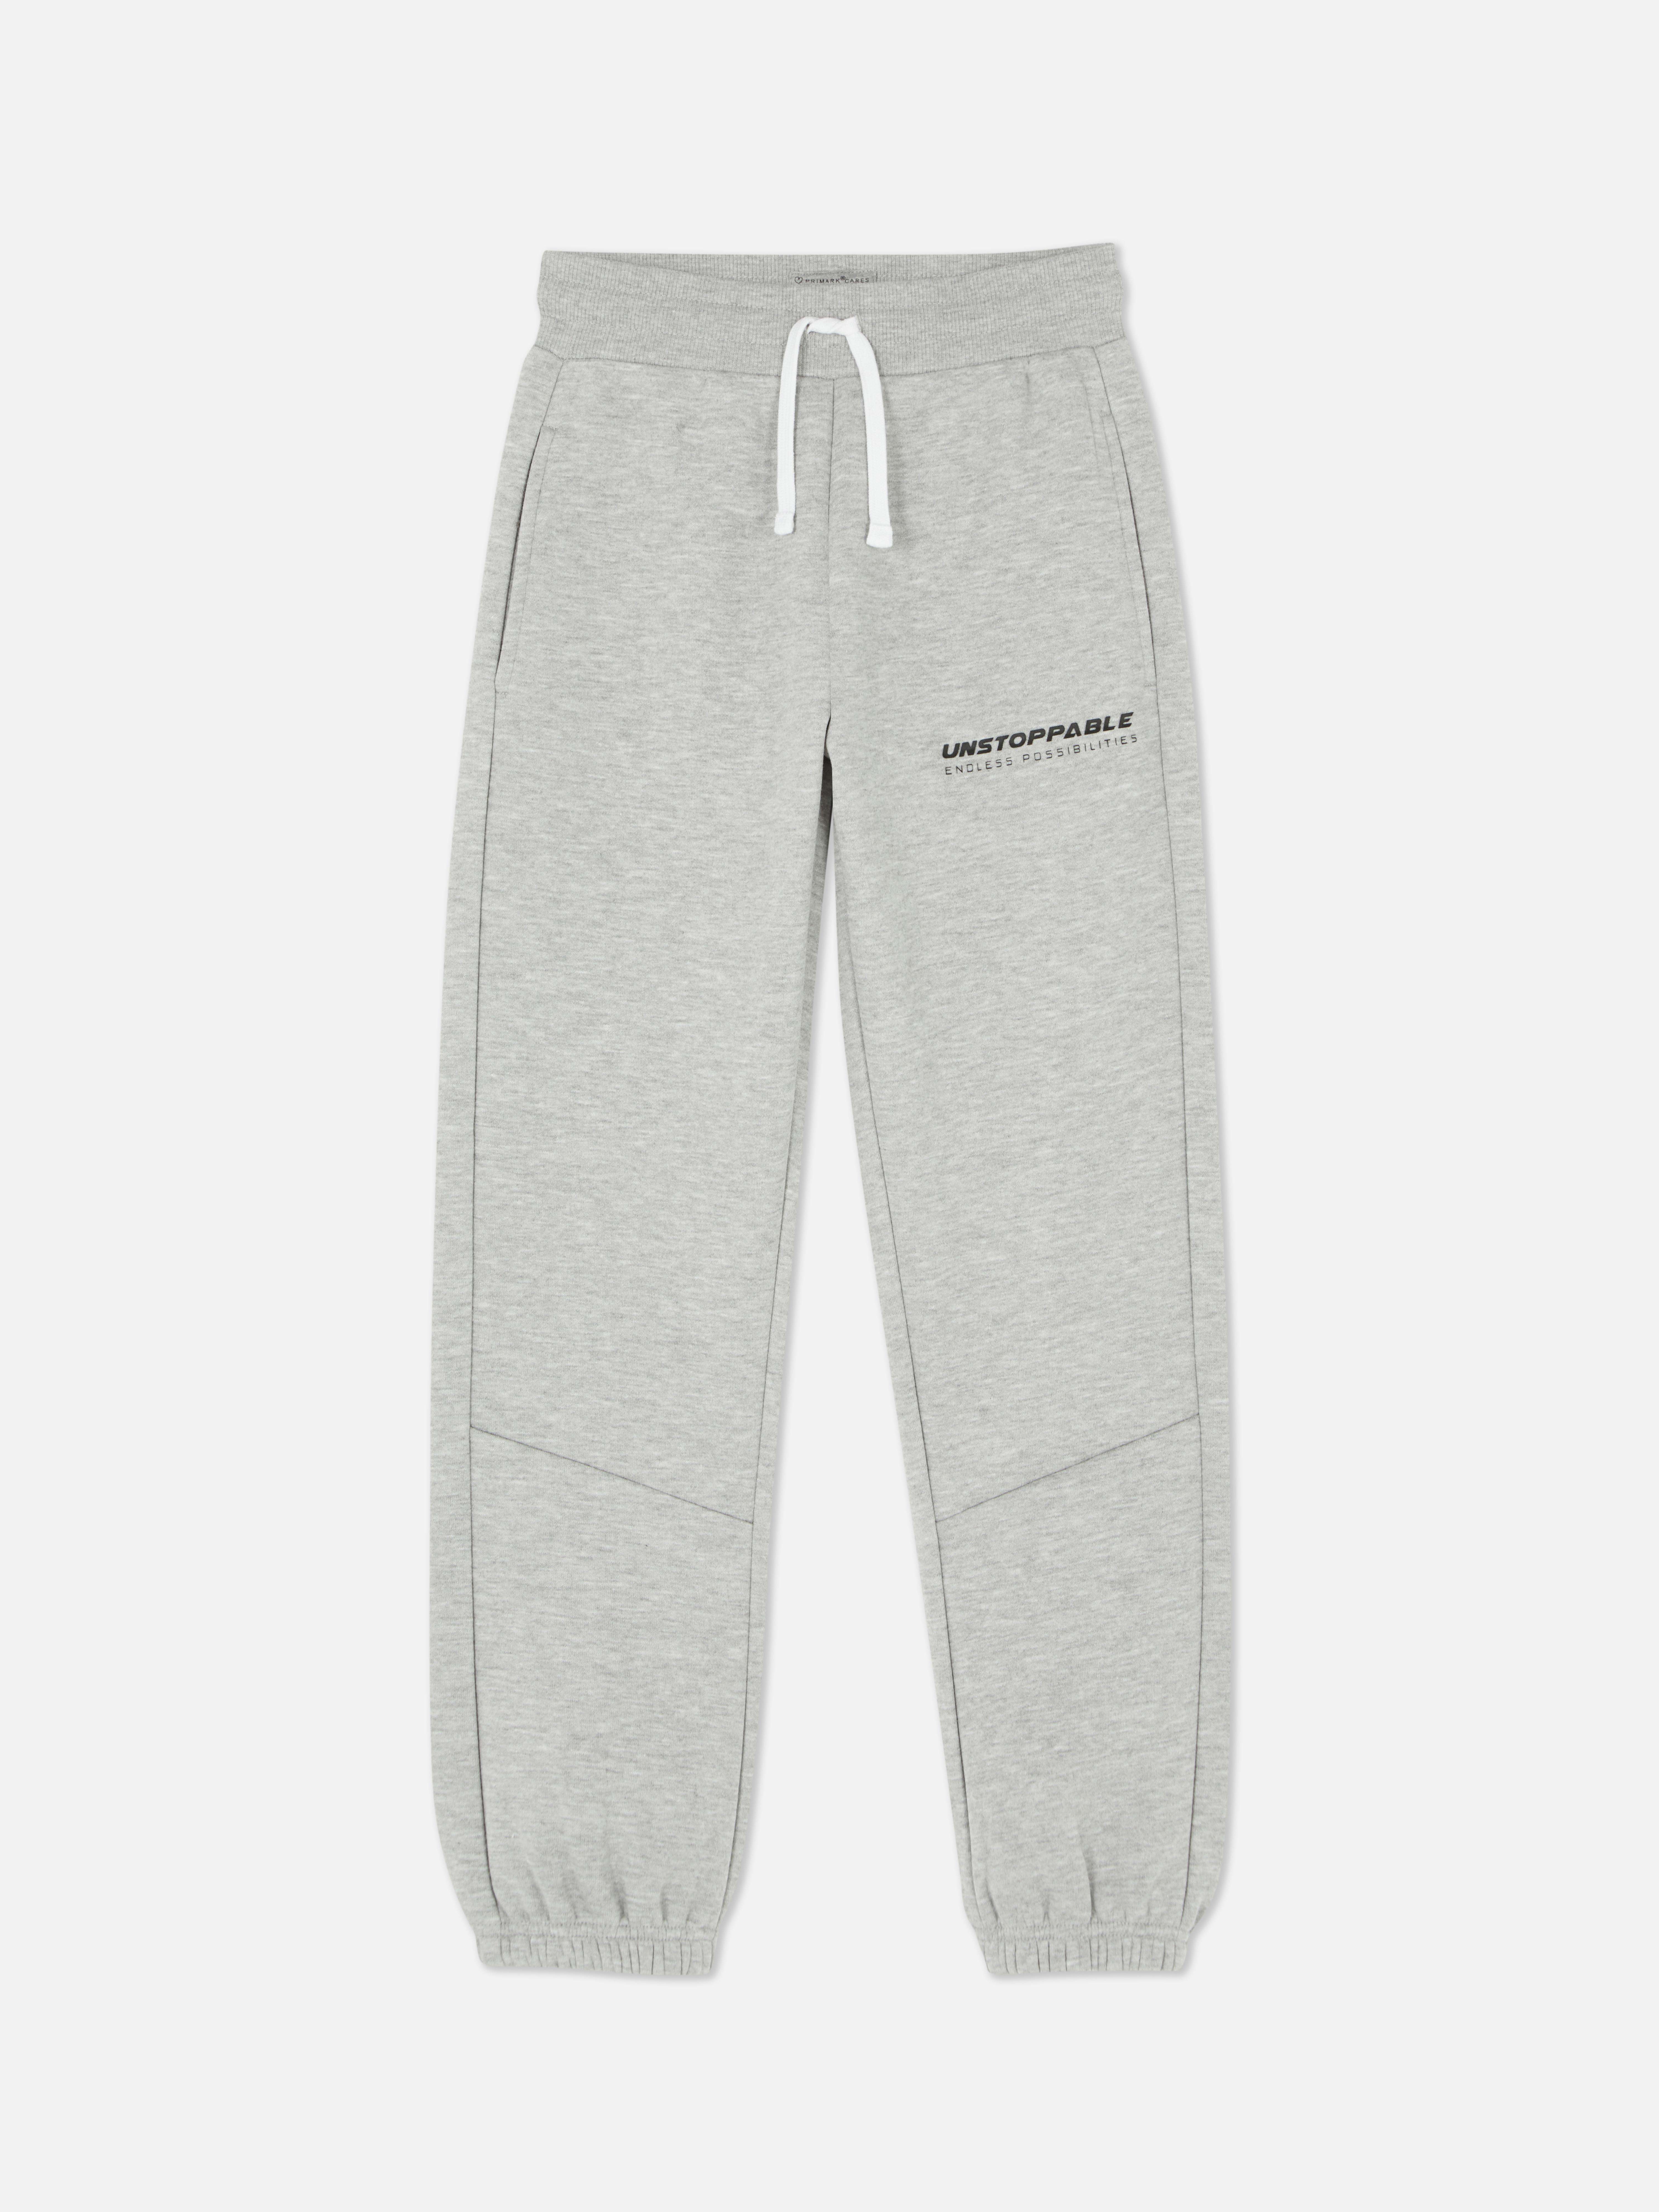 Unstoppable Graphic Cuffed Joggers